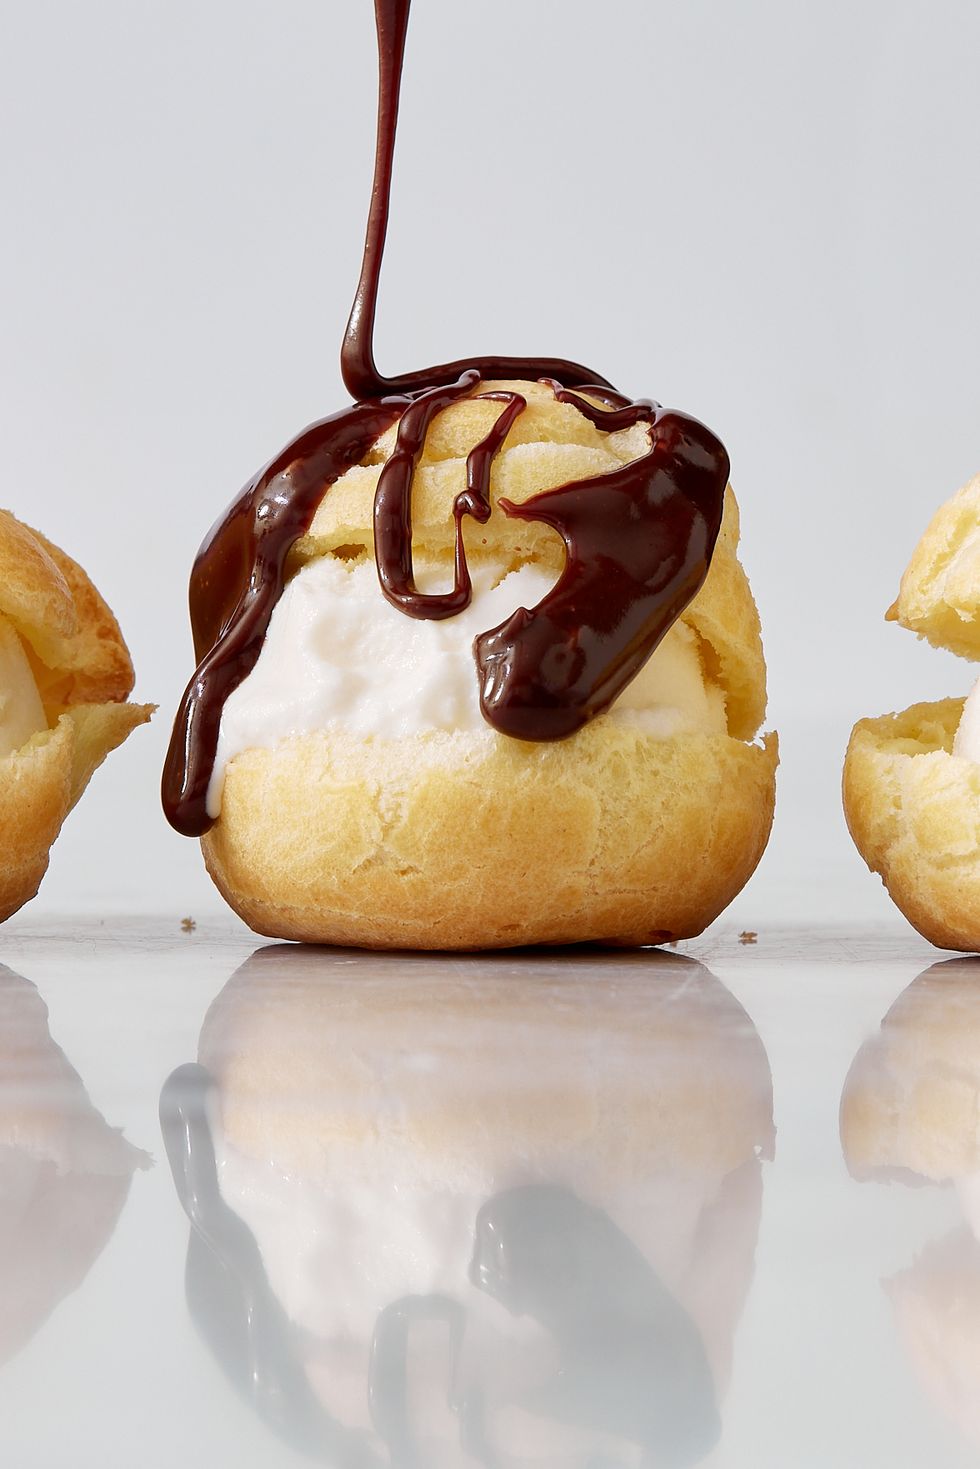 profiteroles drizzled with chocolate and filled with vanilla ice cream